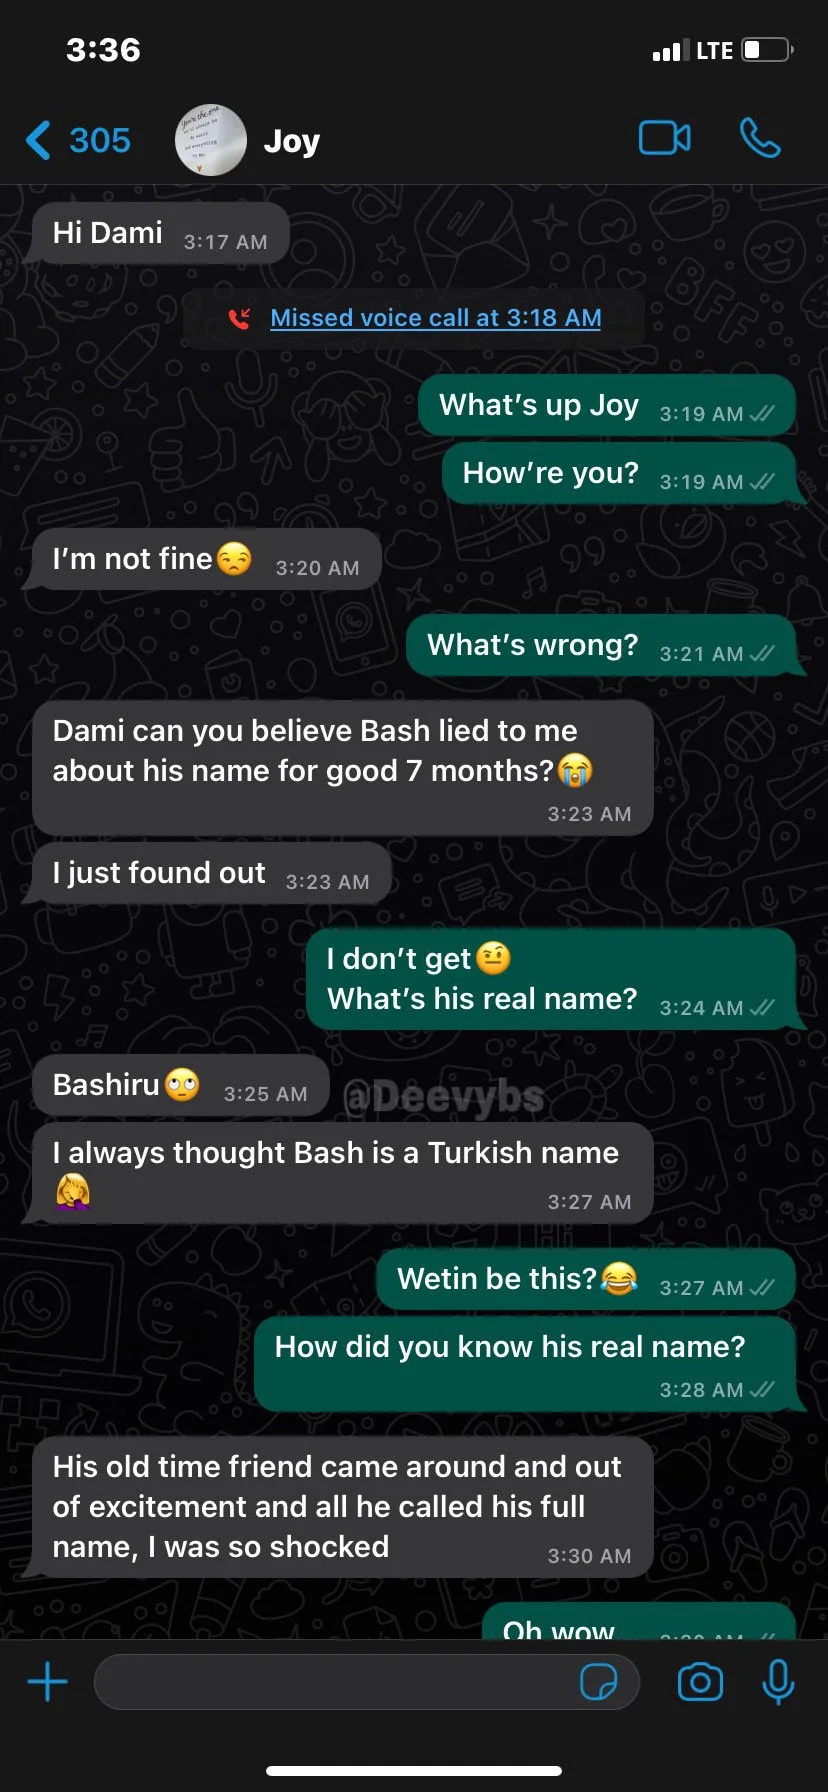 Lady breaks up with boyfriend after discovering his real name is Bashiru - a